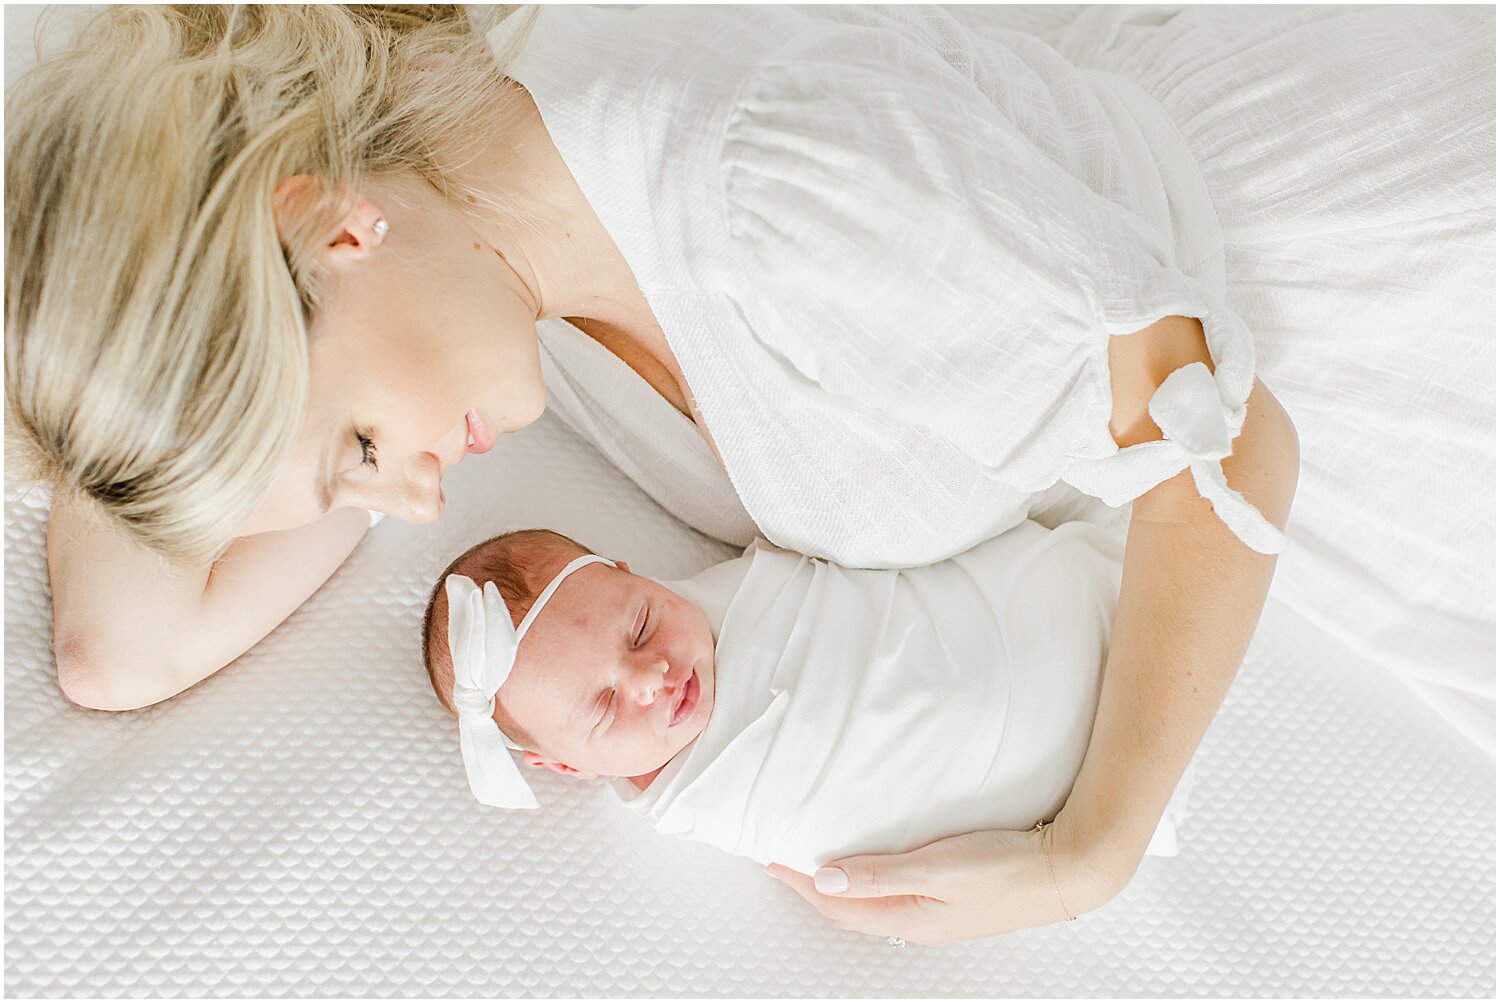 Lifestyle newborn session with Mama and baby girl on the bed. Photos by Rye, NY Newborn Photographer, Kristin Wood Photography.